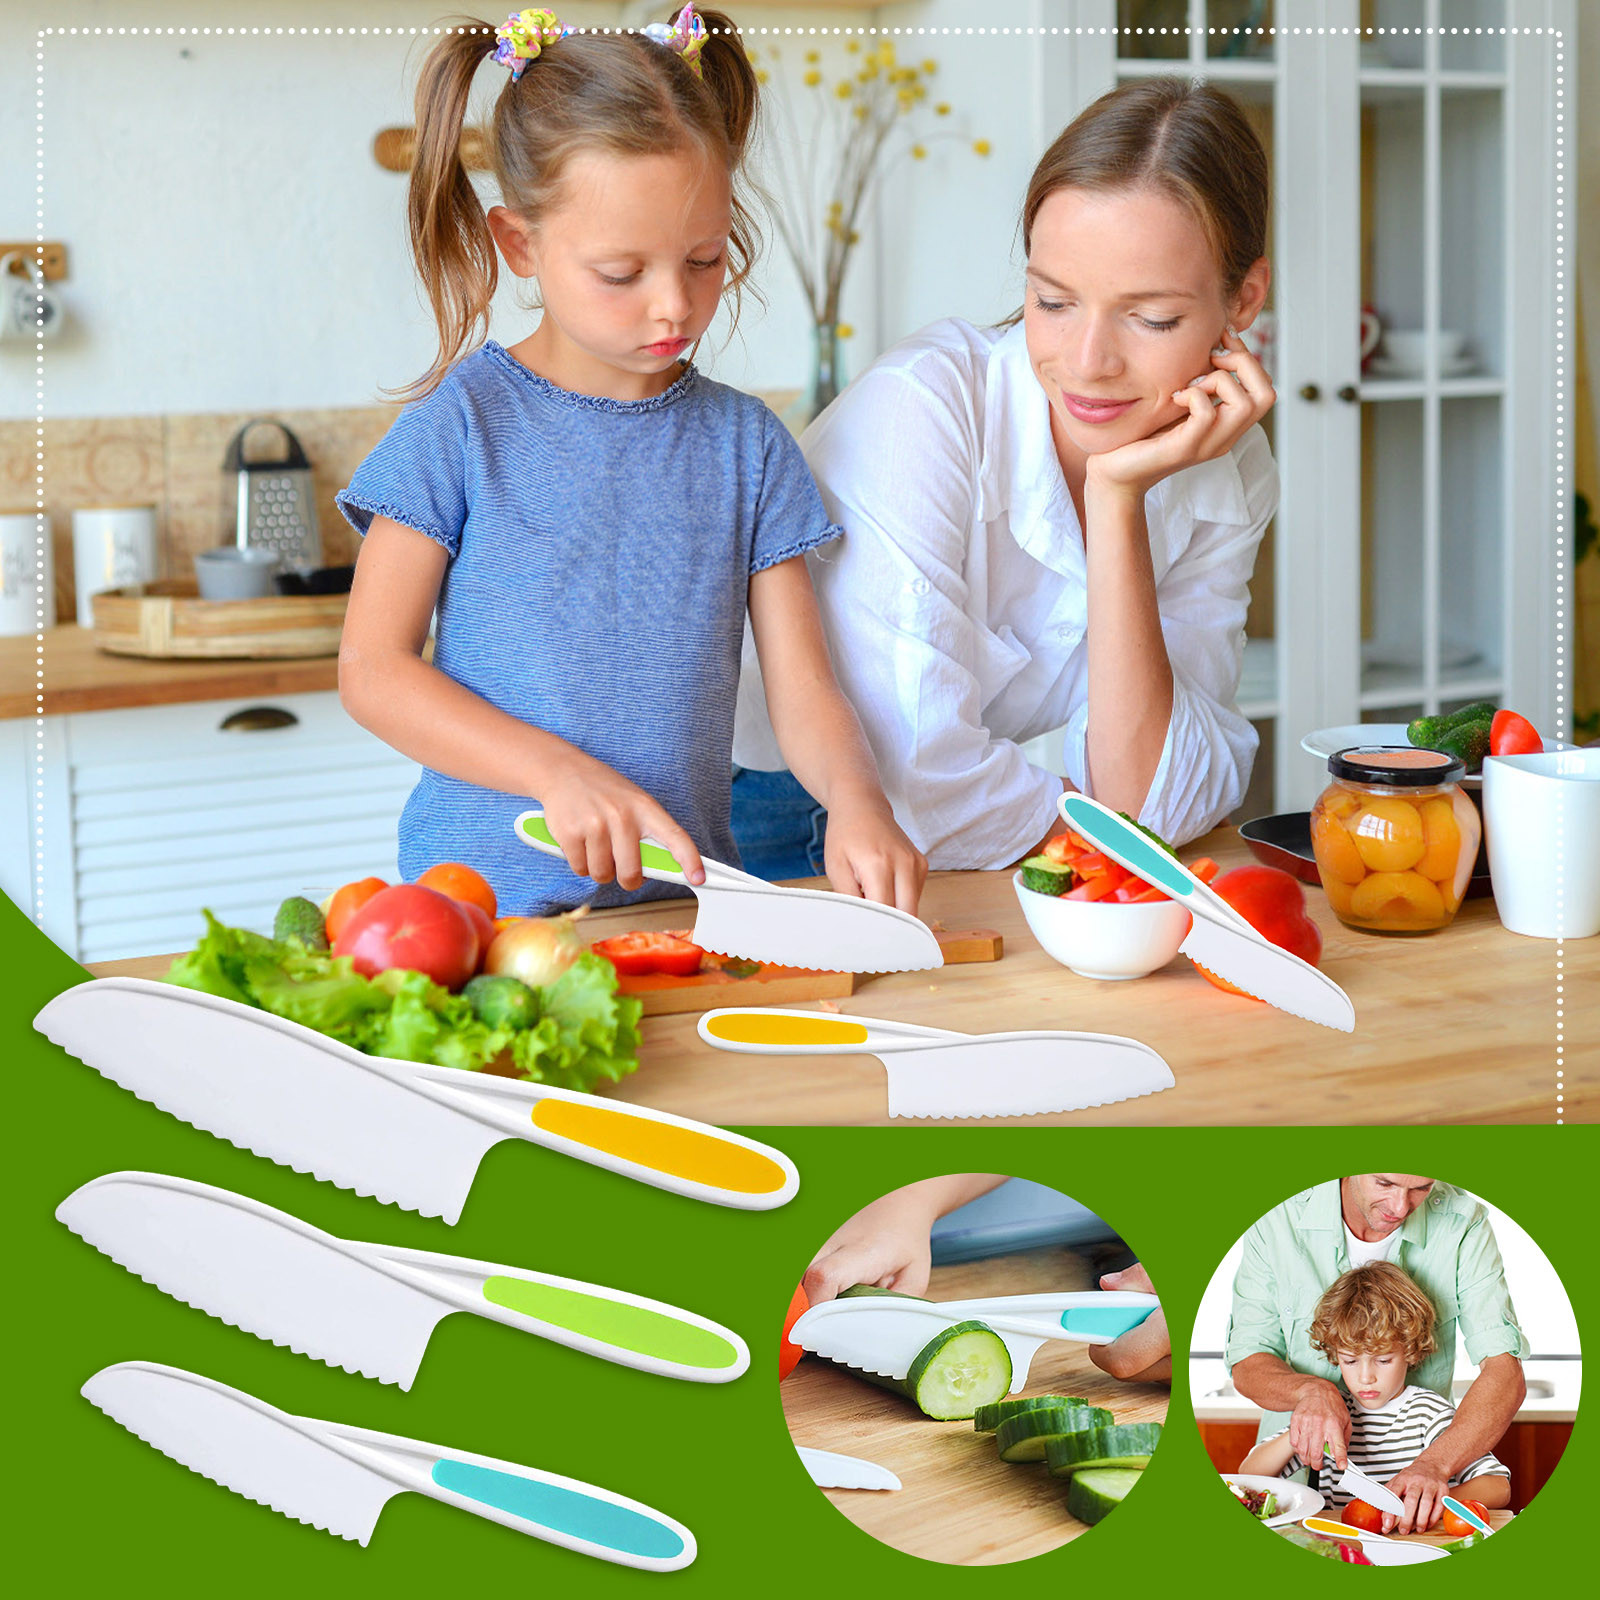 Tiitstoy 3 Piece Kids Kitchen Baking Knife Set,Safe To Use,Firm  Grip,Serrated Edges,Kids Knife,Protects Little Chef's,Perfect for Cutting  Food and